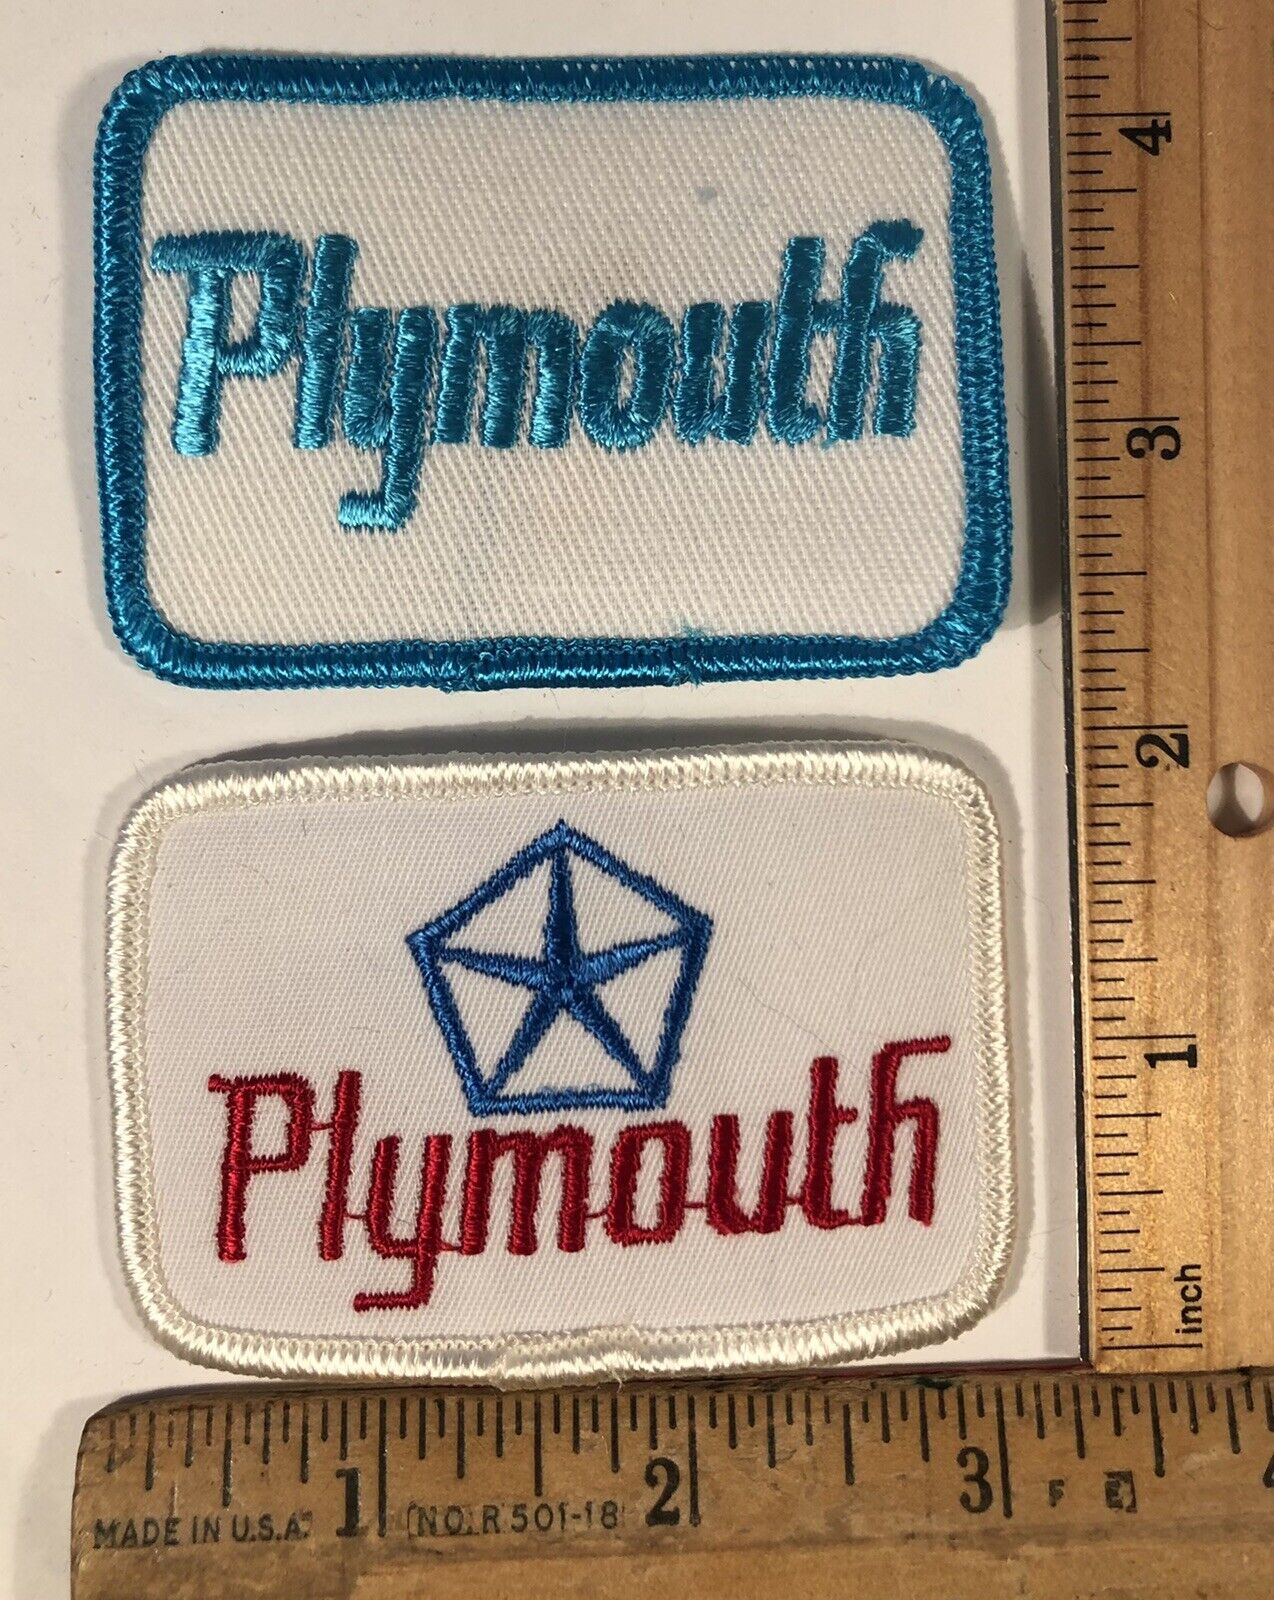 Vintage Lot Of 2 Plymouth Logo Iron On Patch Mopar Muscle Car NOS Chrysler